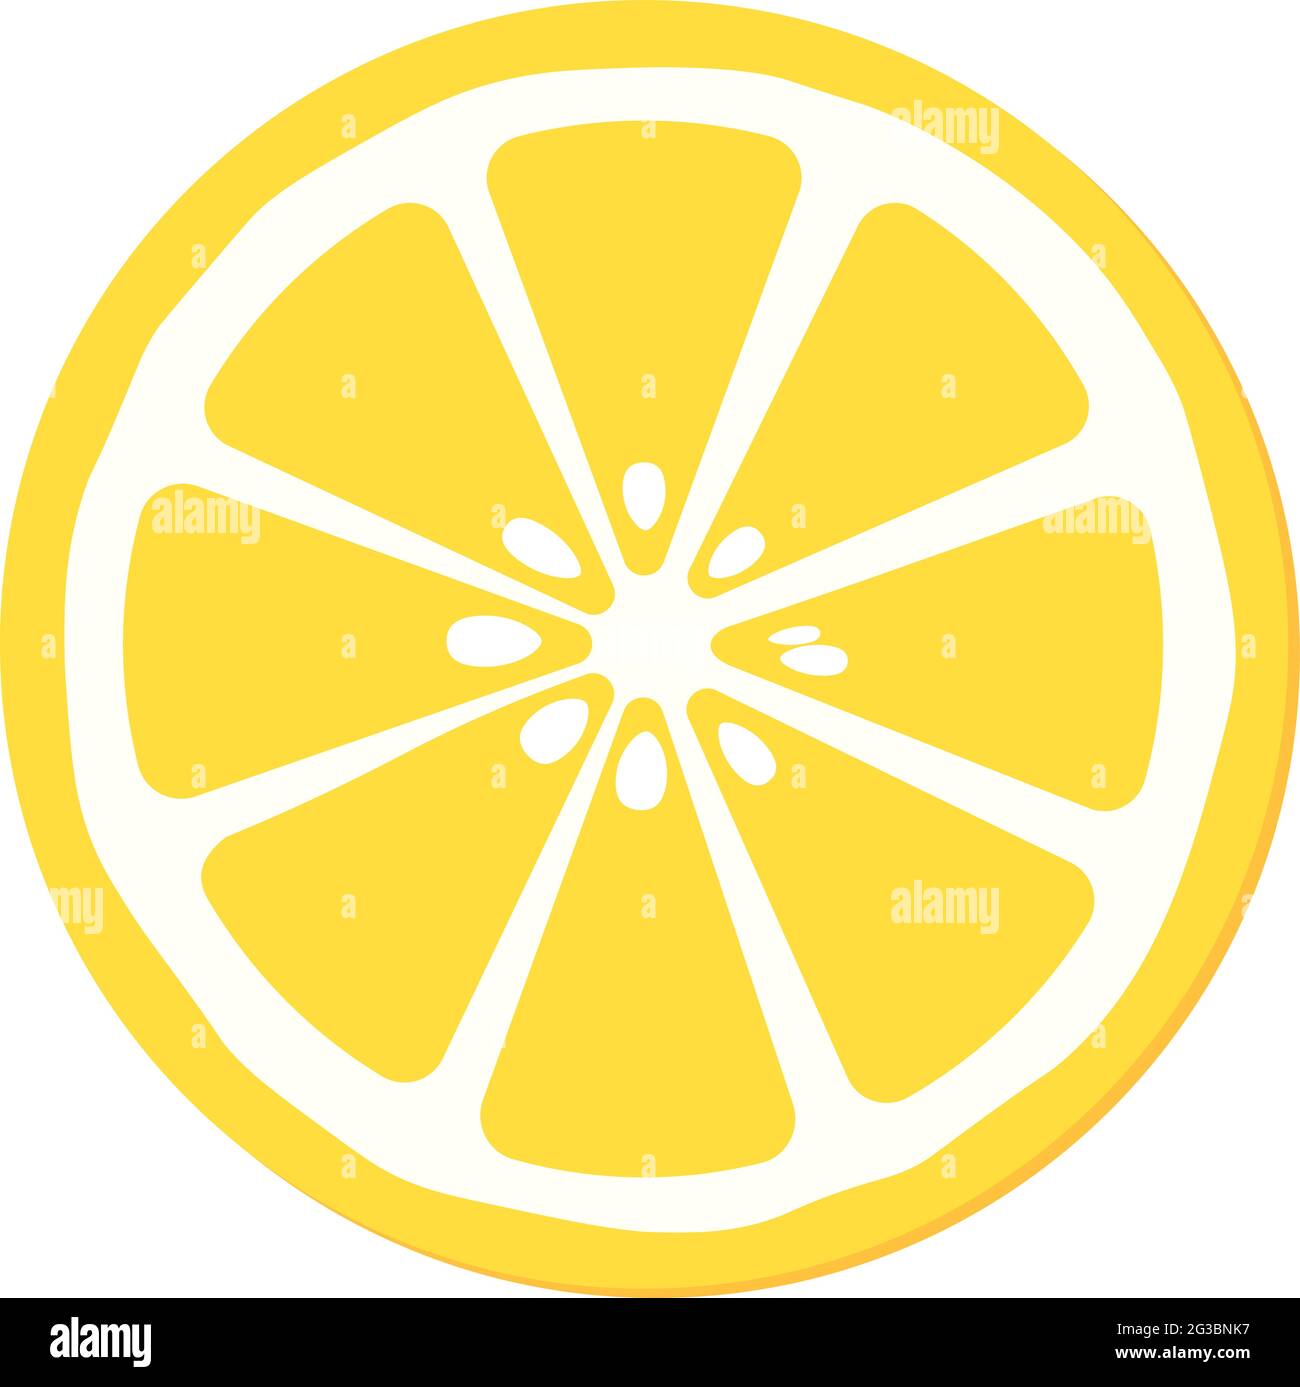 simple yellow and white slice of lemon vector illustration Stock Vector